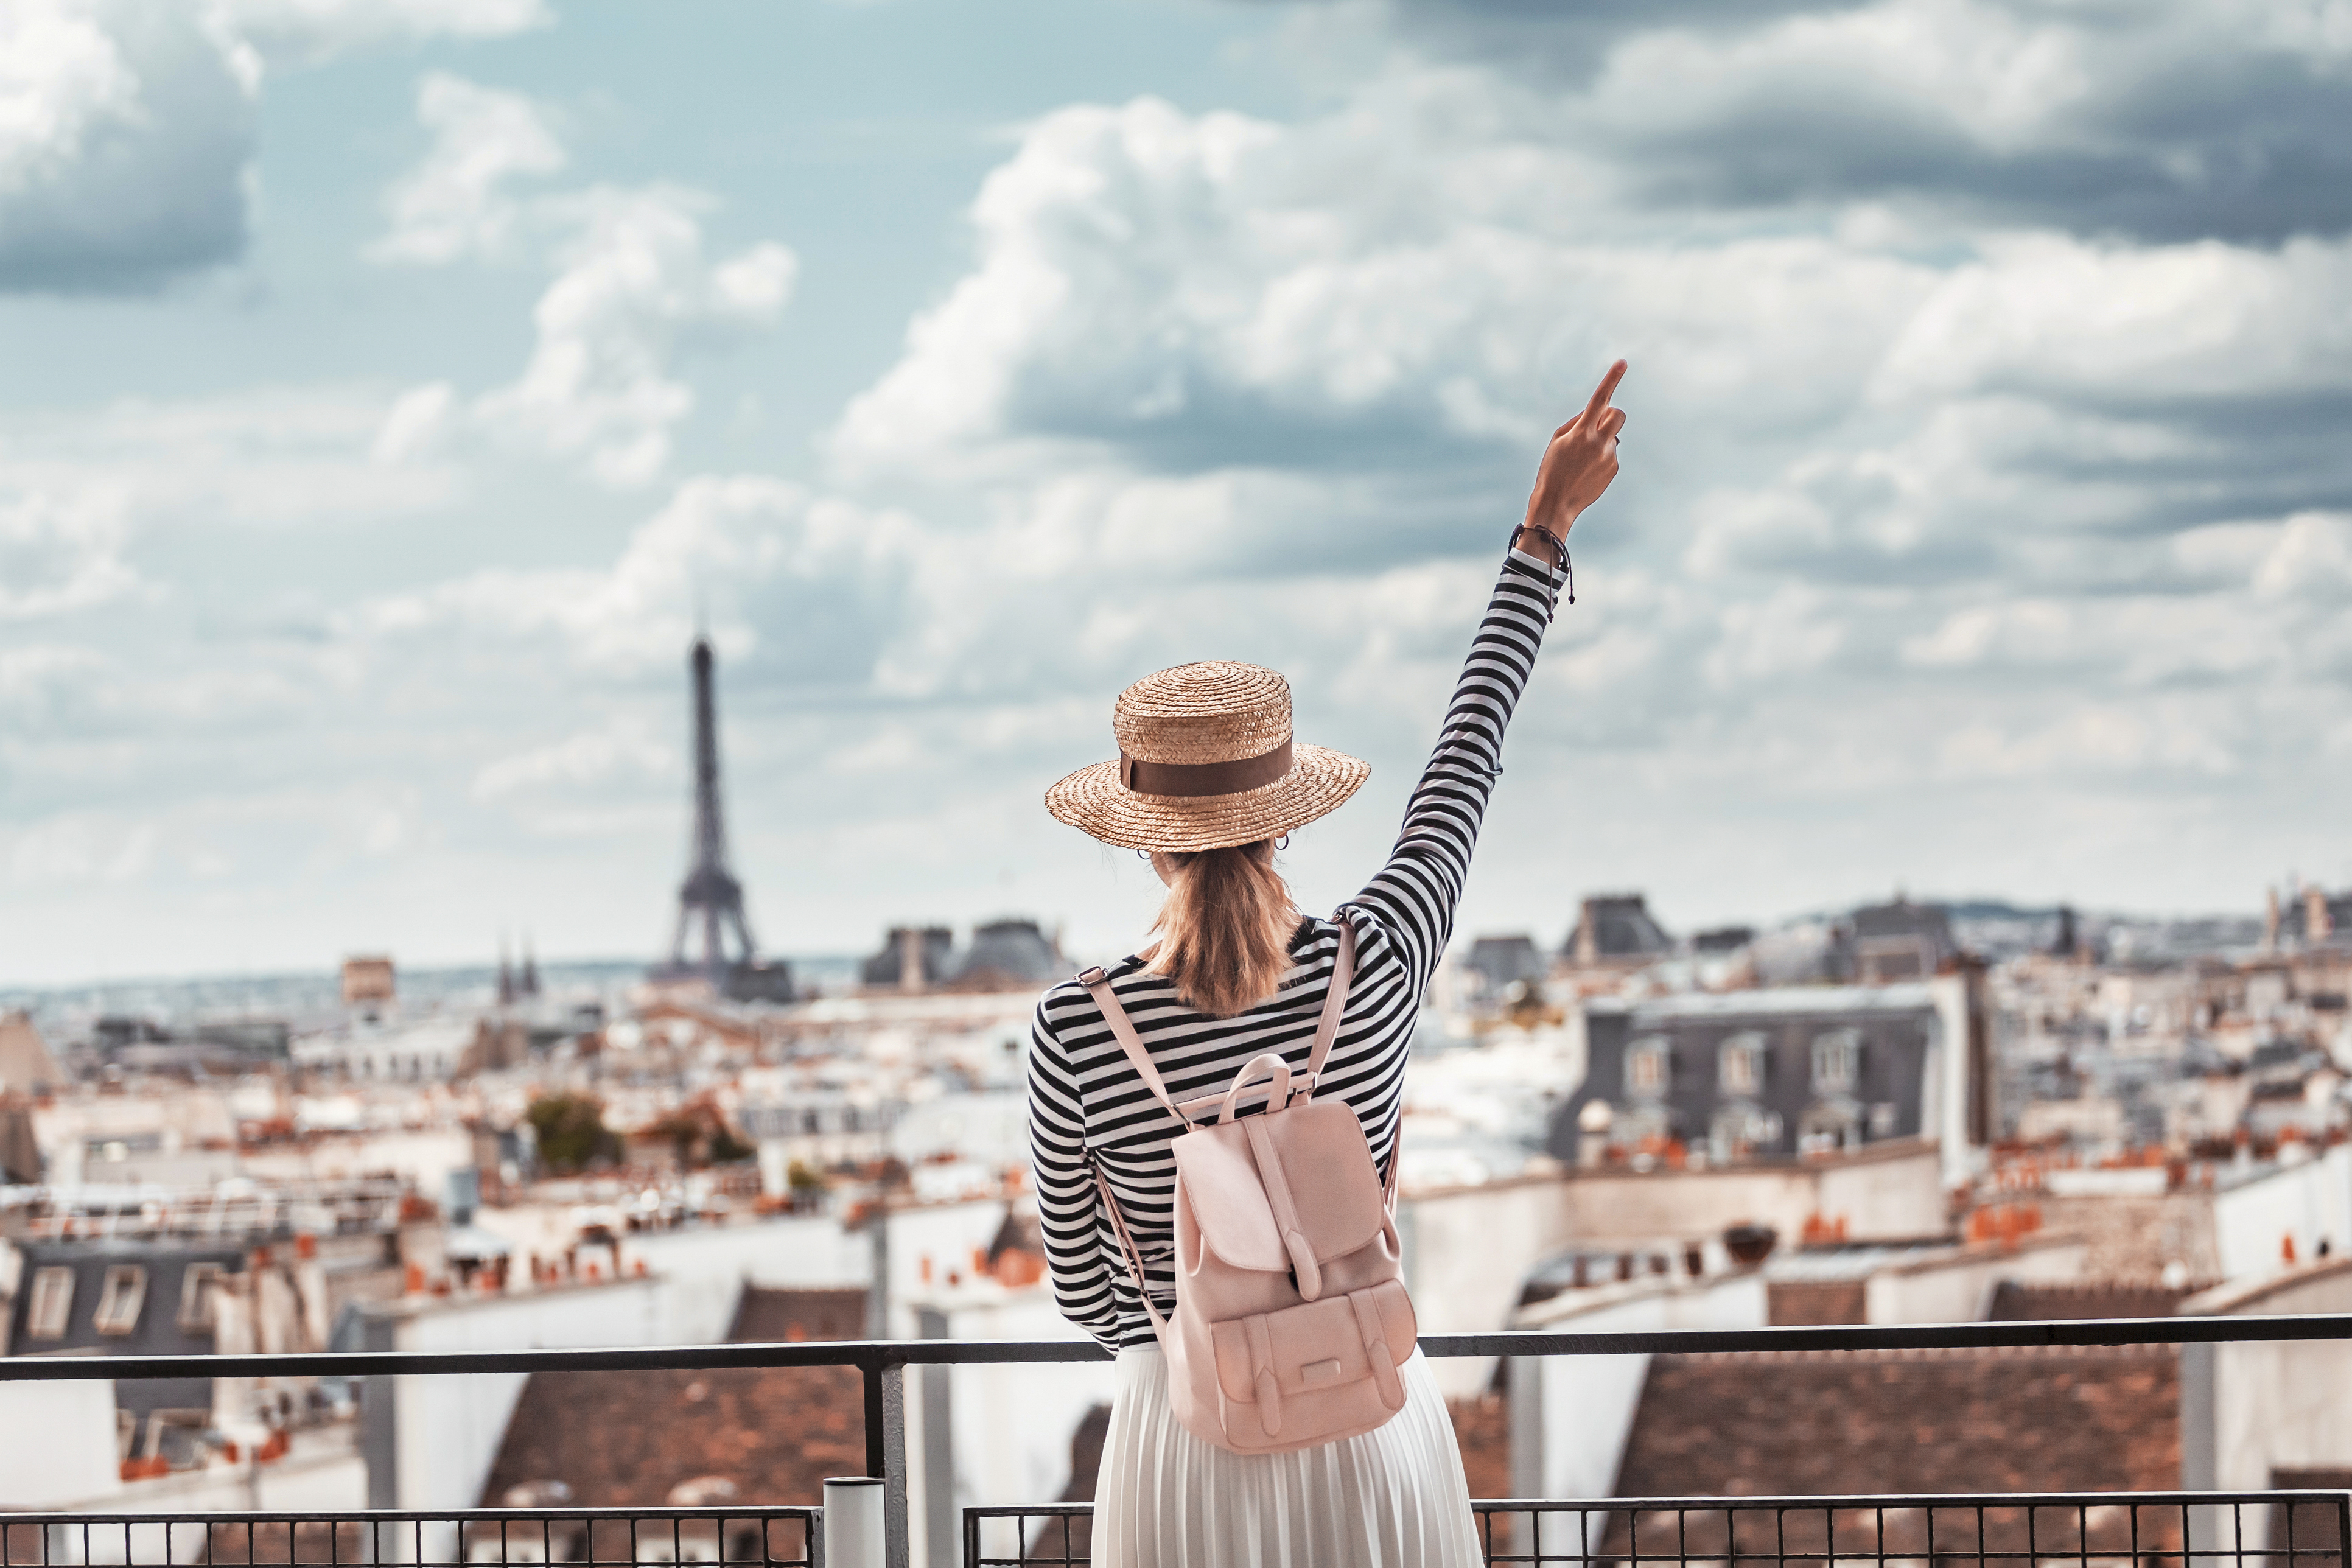 Study abroad in France with The Experiment to discover its diverse cultures and regions—from Paris to a border community and its neighboring country. High school study abroad in Europe with The Experiment in International Living. Girl enjoys a grand view of Paris from the observation deck